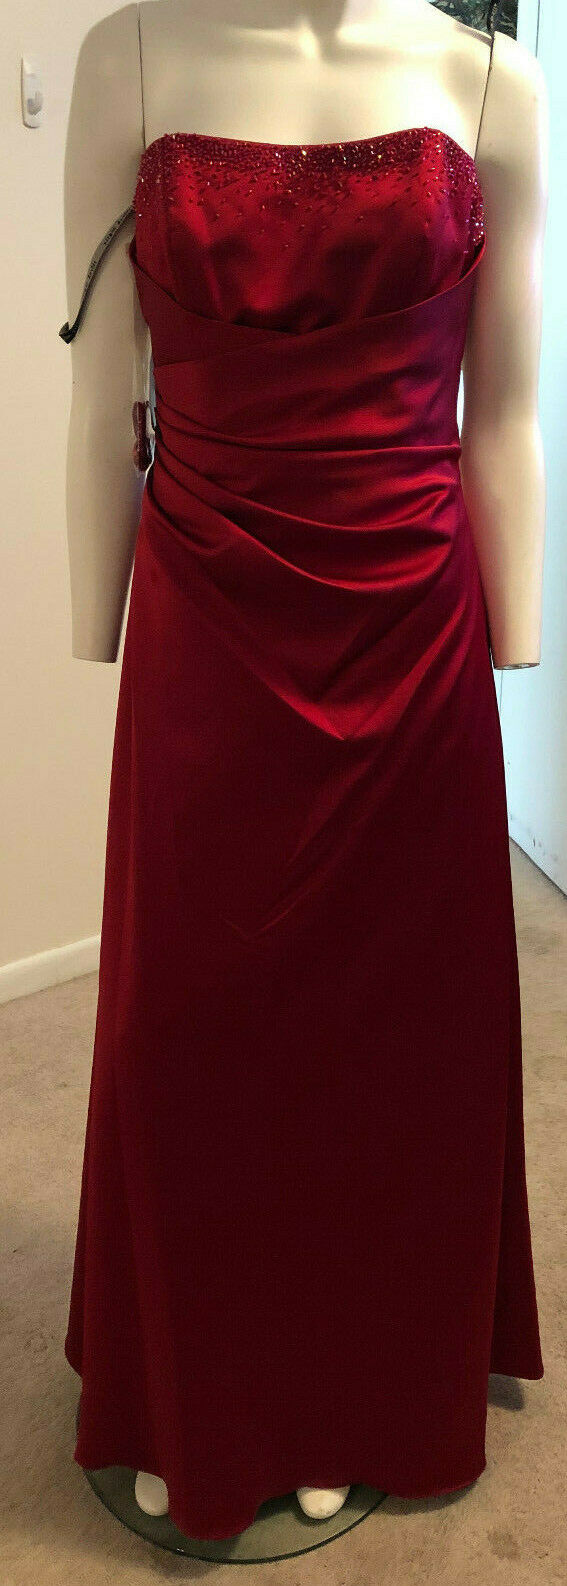 NWT Red (Claret) Strapless Beaded Prom Dress w/Rouching by Alfred Angelo Size 8